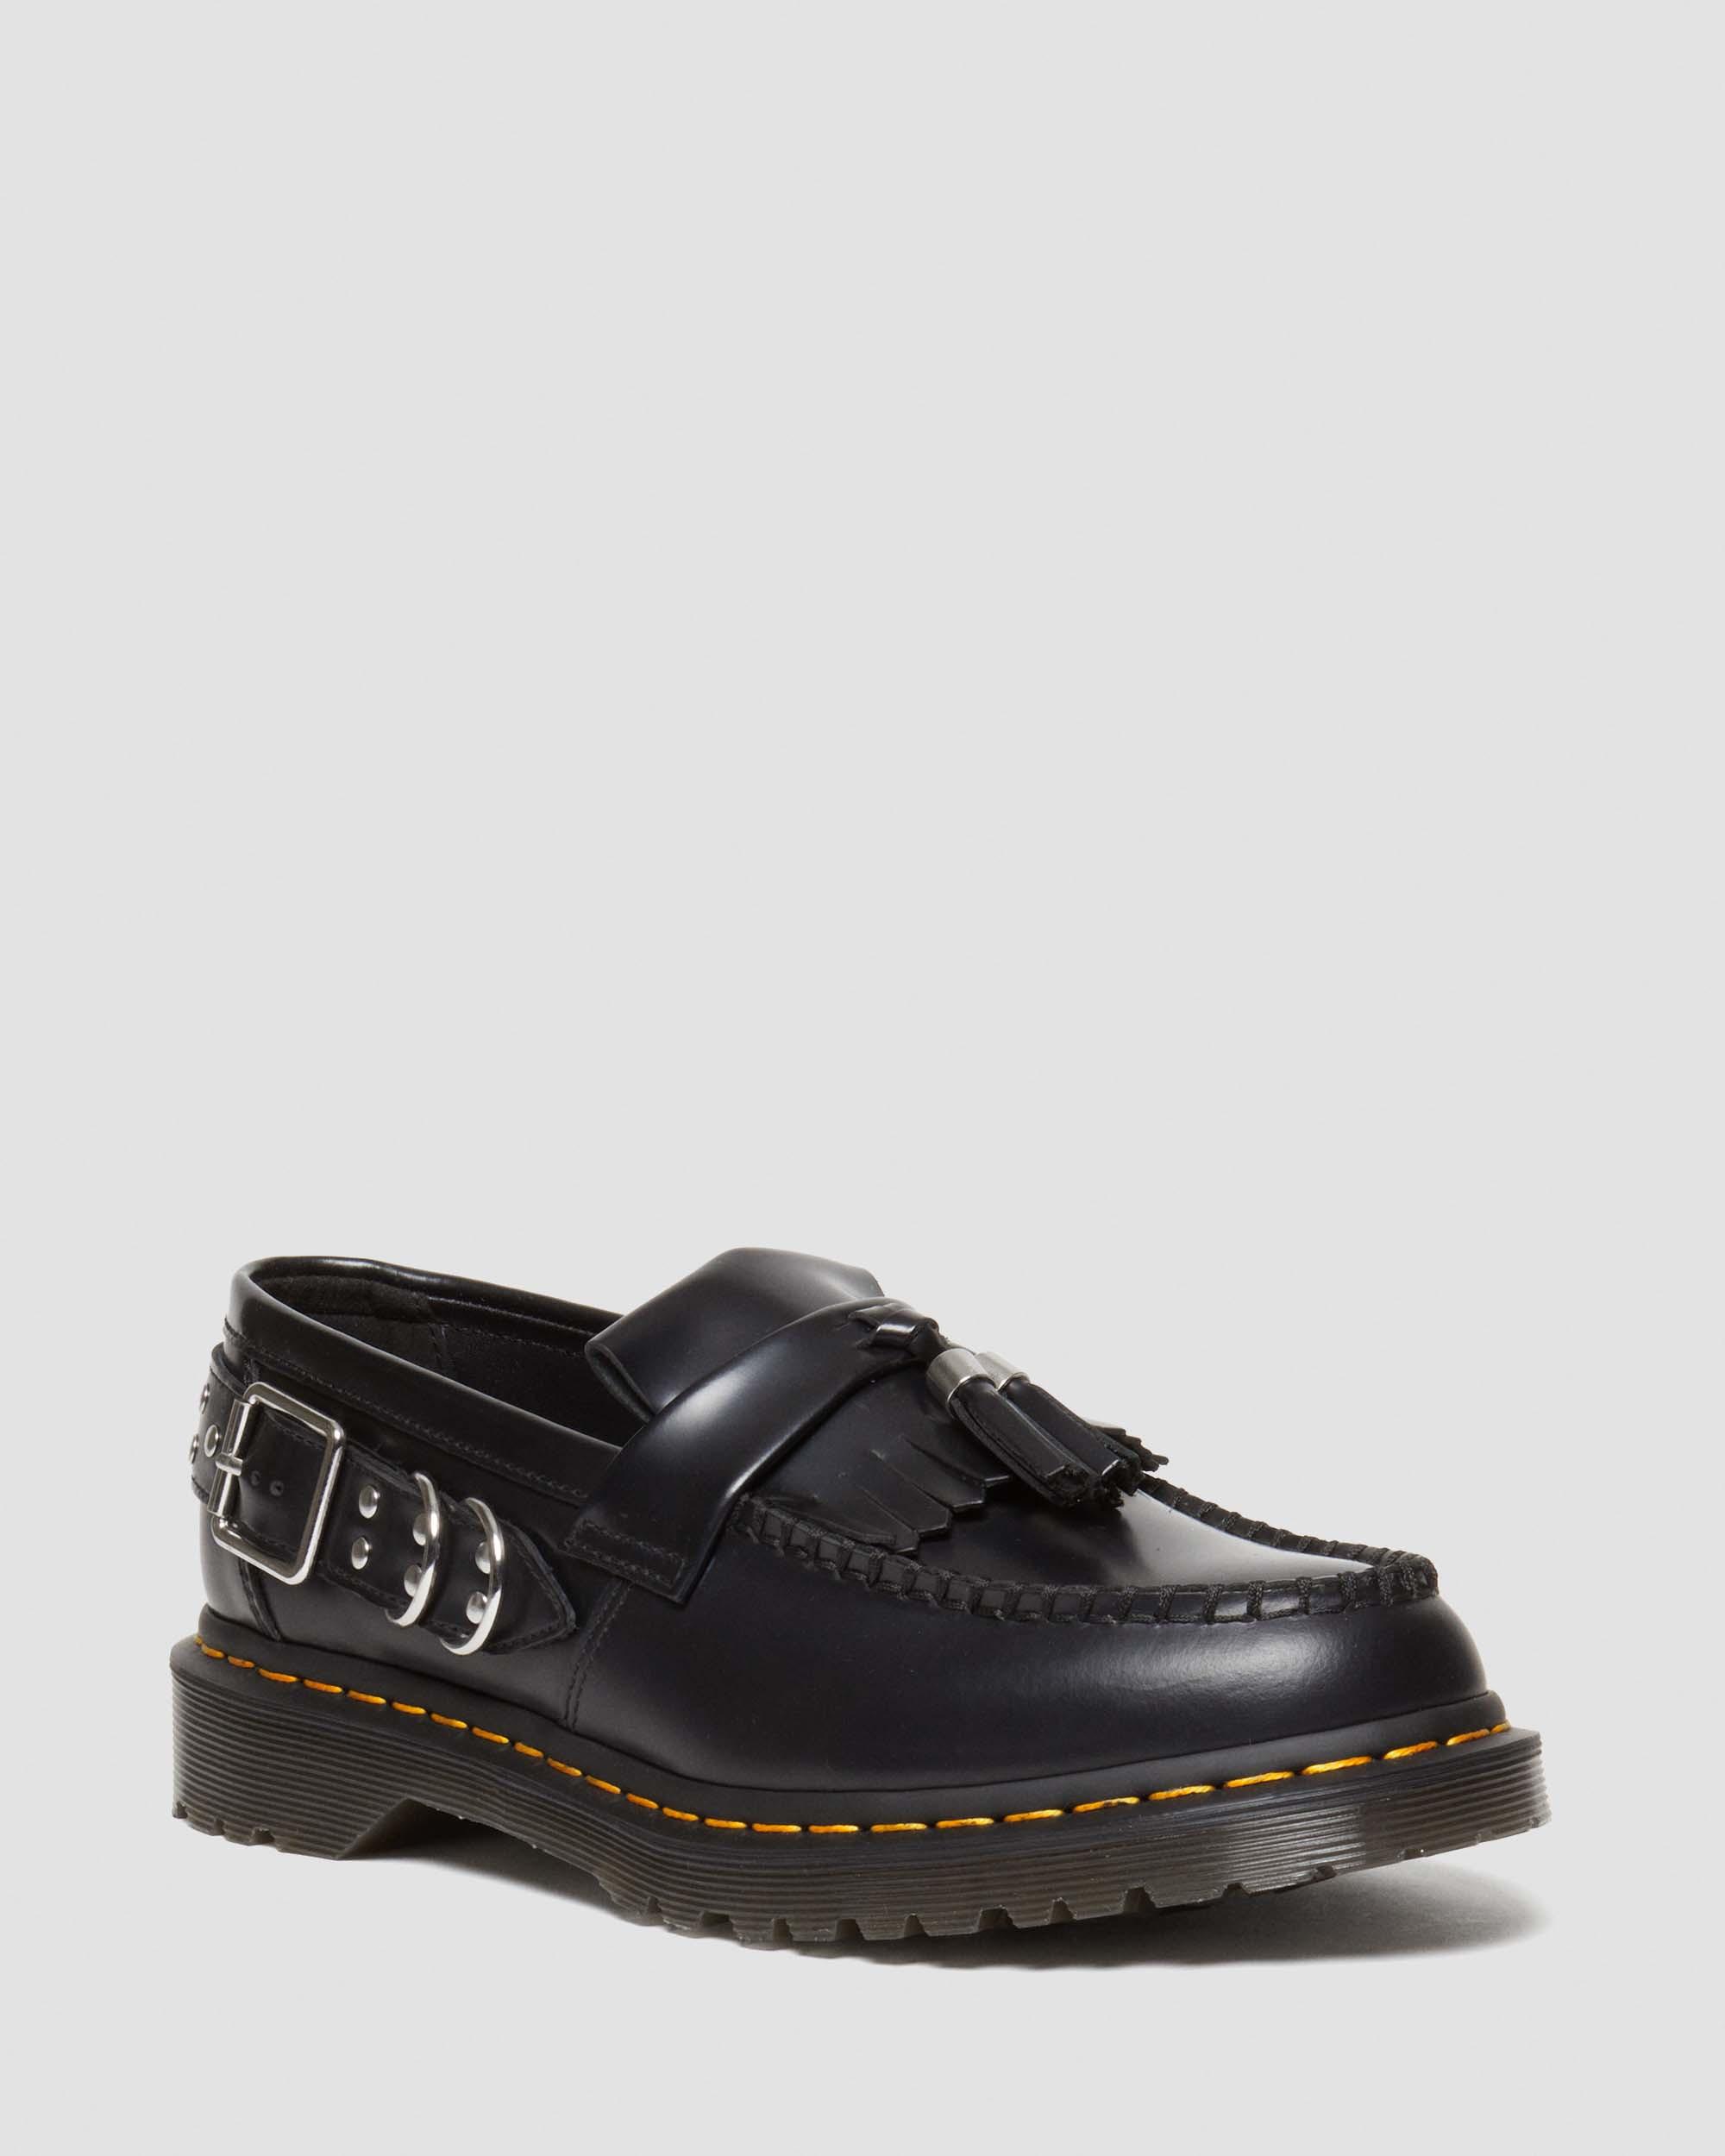 Adrian Yellow Stitch Leather Tassel Loafers, Black | Dr. Martens